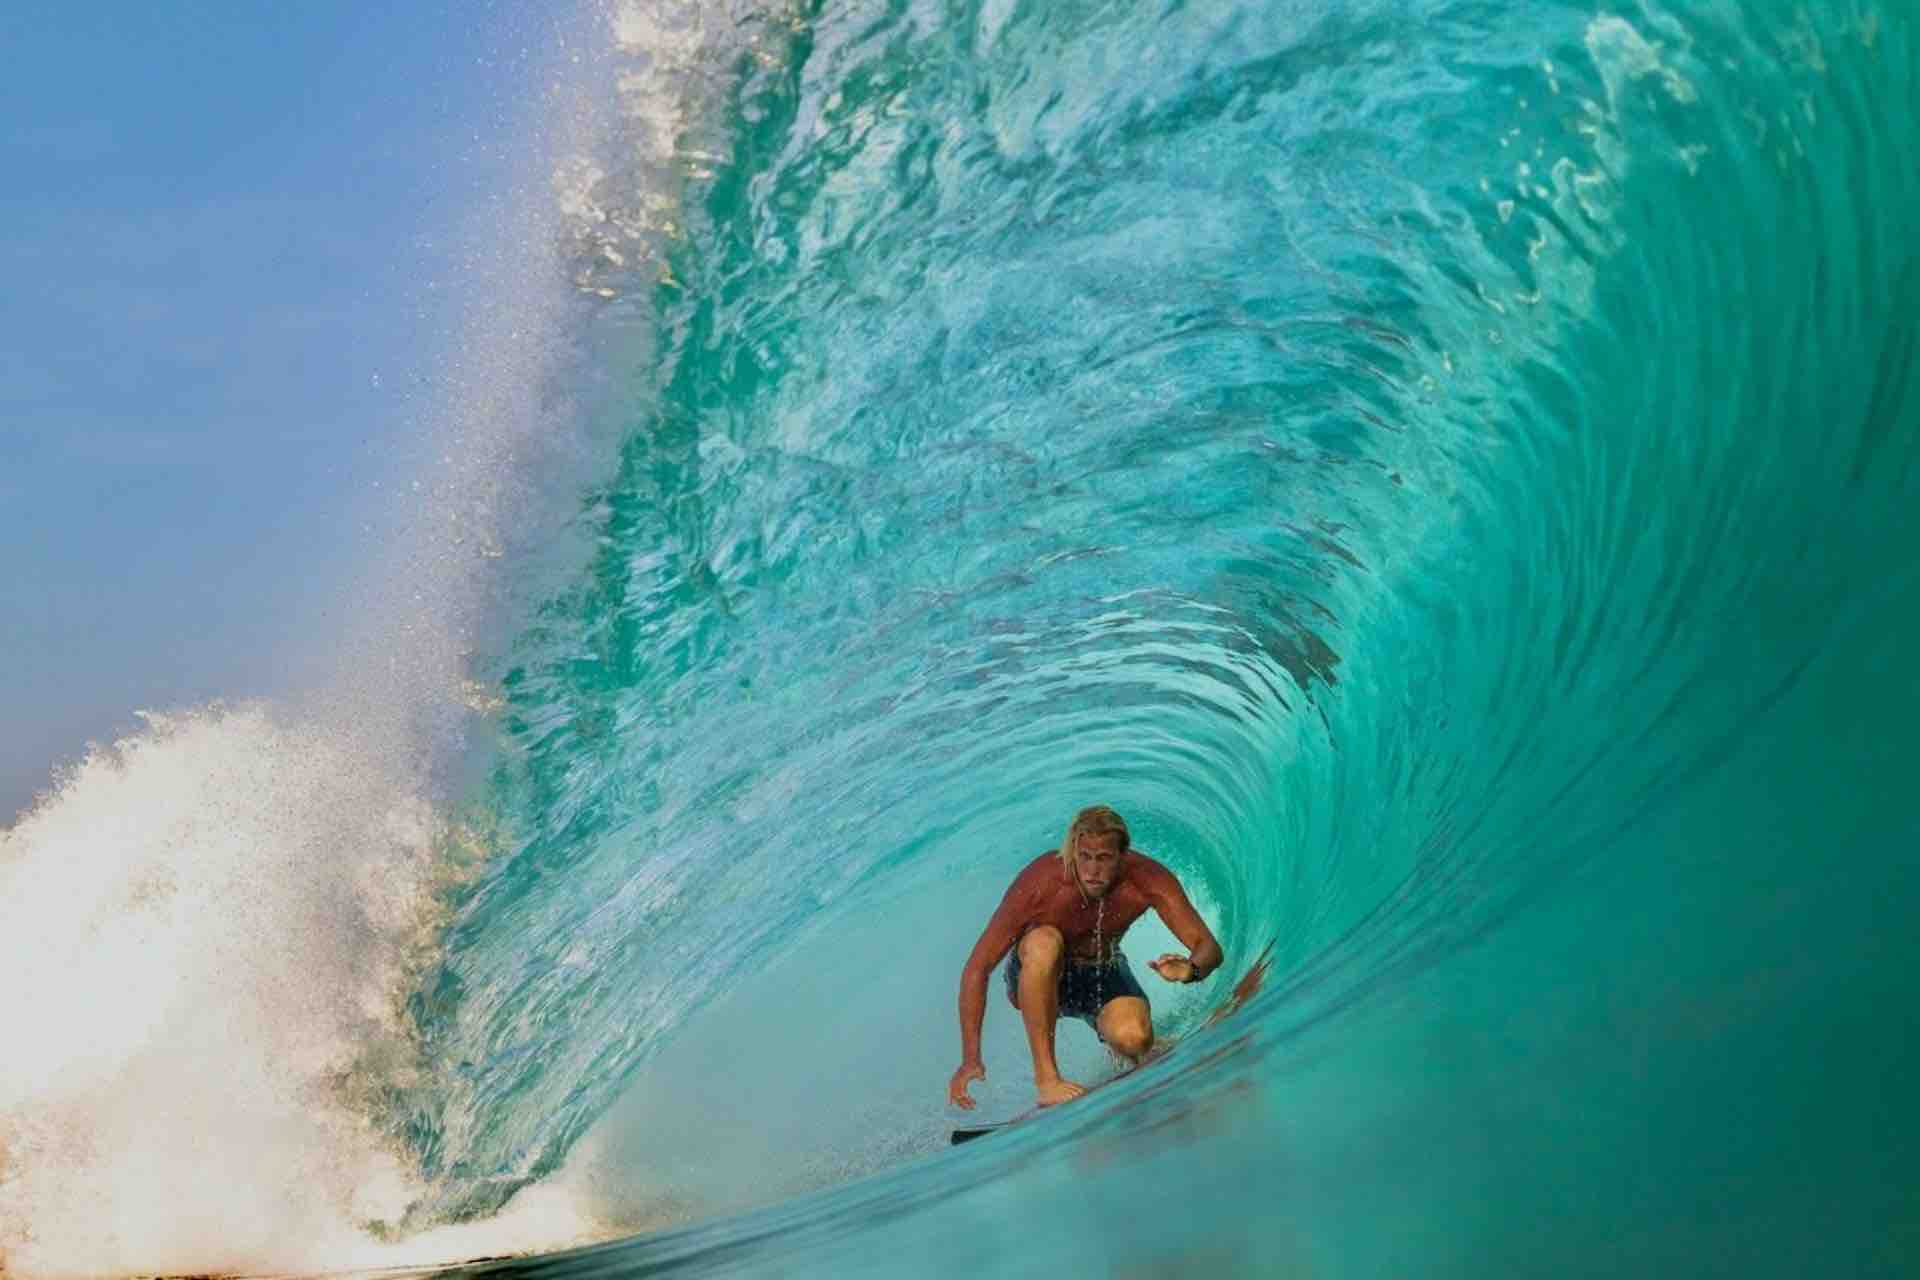 Surfer in wave getting